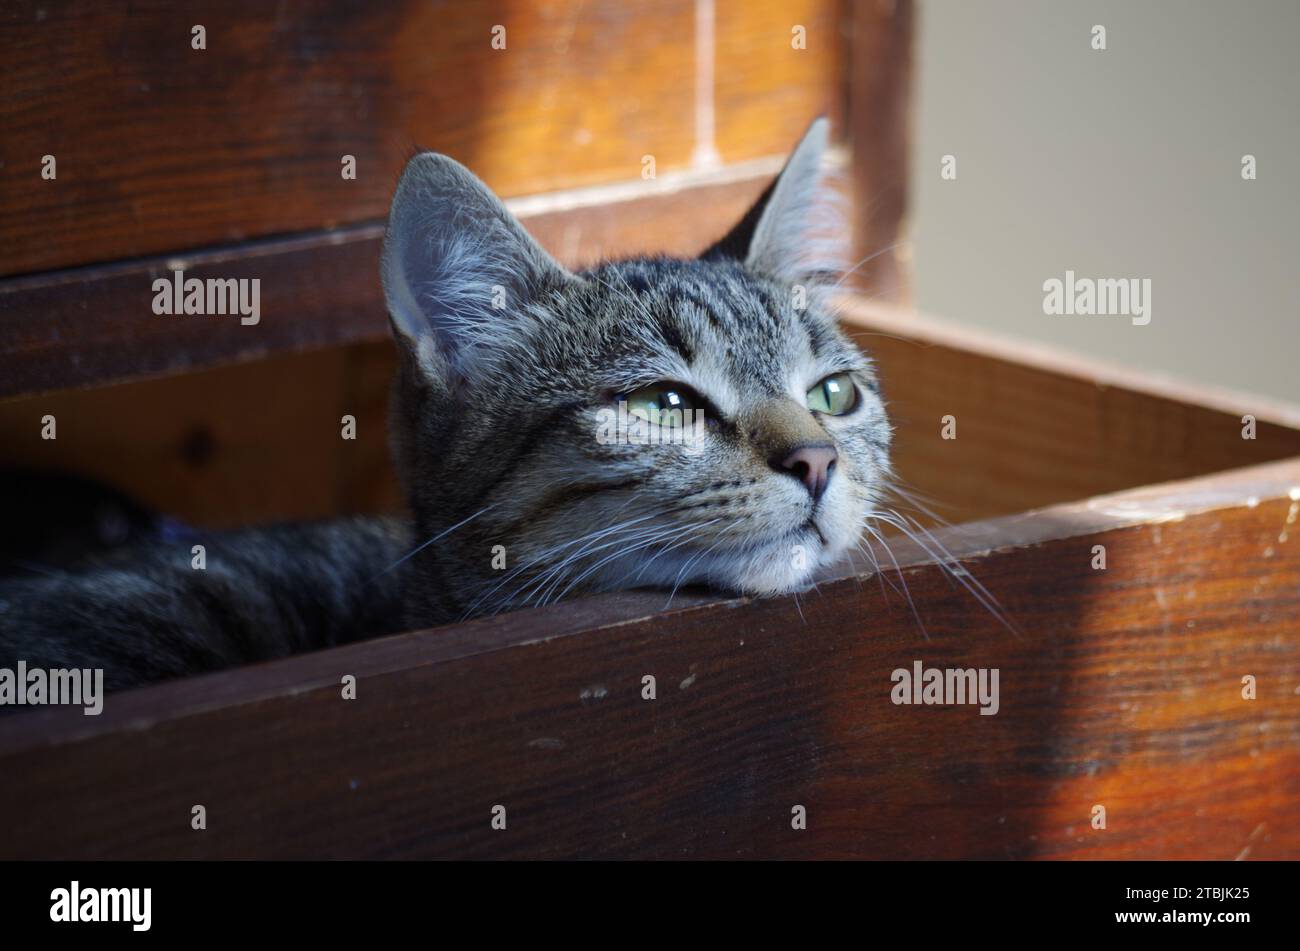 Adorable cat resting Stock Photo